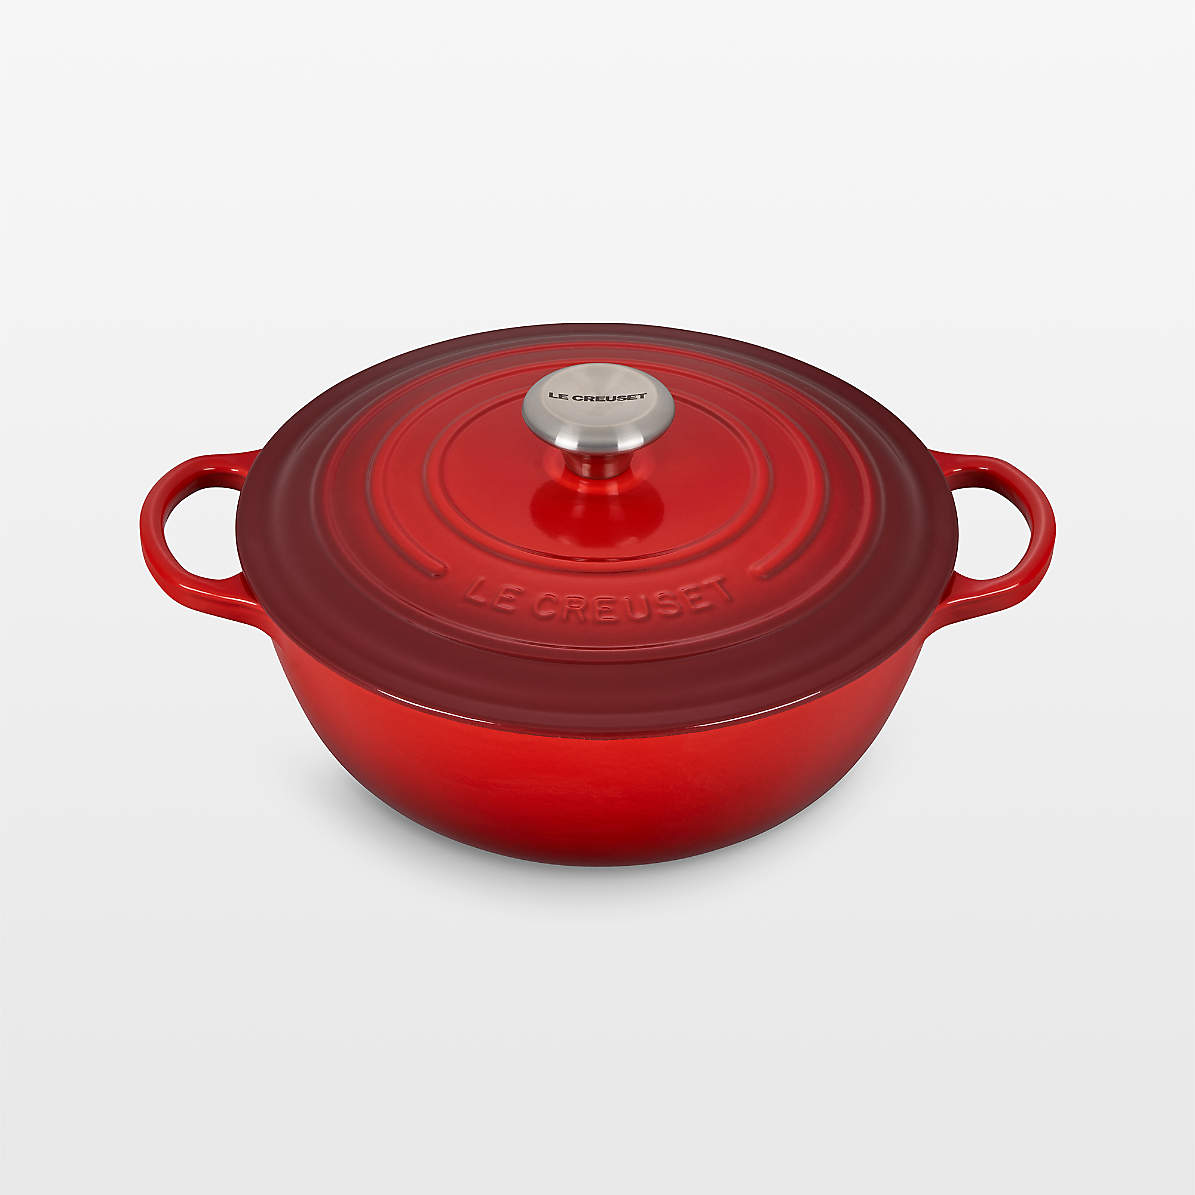 https://cb.scene7.com/is/image/Crate/LeCreu7p5qChfOvnCrsSSS23_VND/$web_pdp_main_carousel_zoom_med$/230217114423/le-creuset-signature-7.5-qt.-cerise-red-enameled-cast-iron-chef-oven.jpg